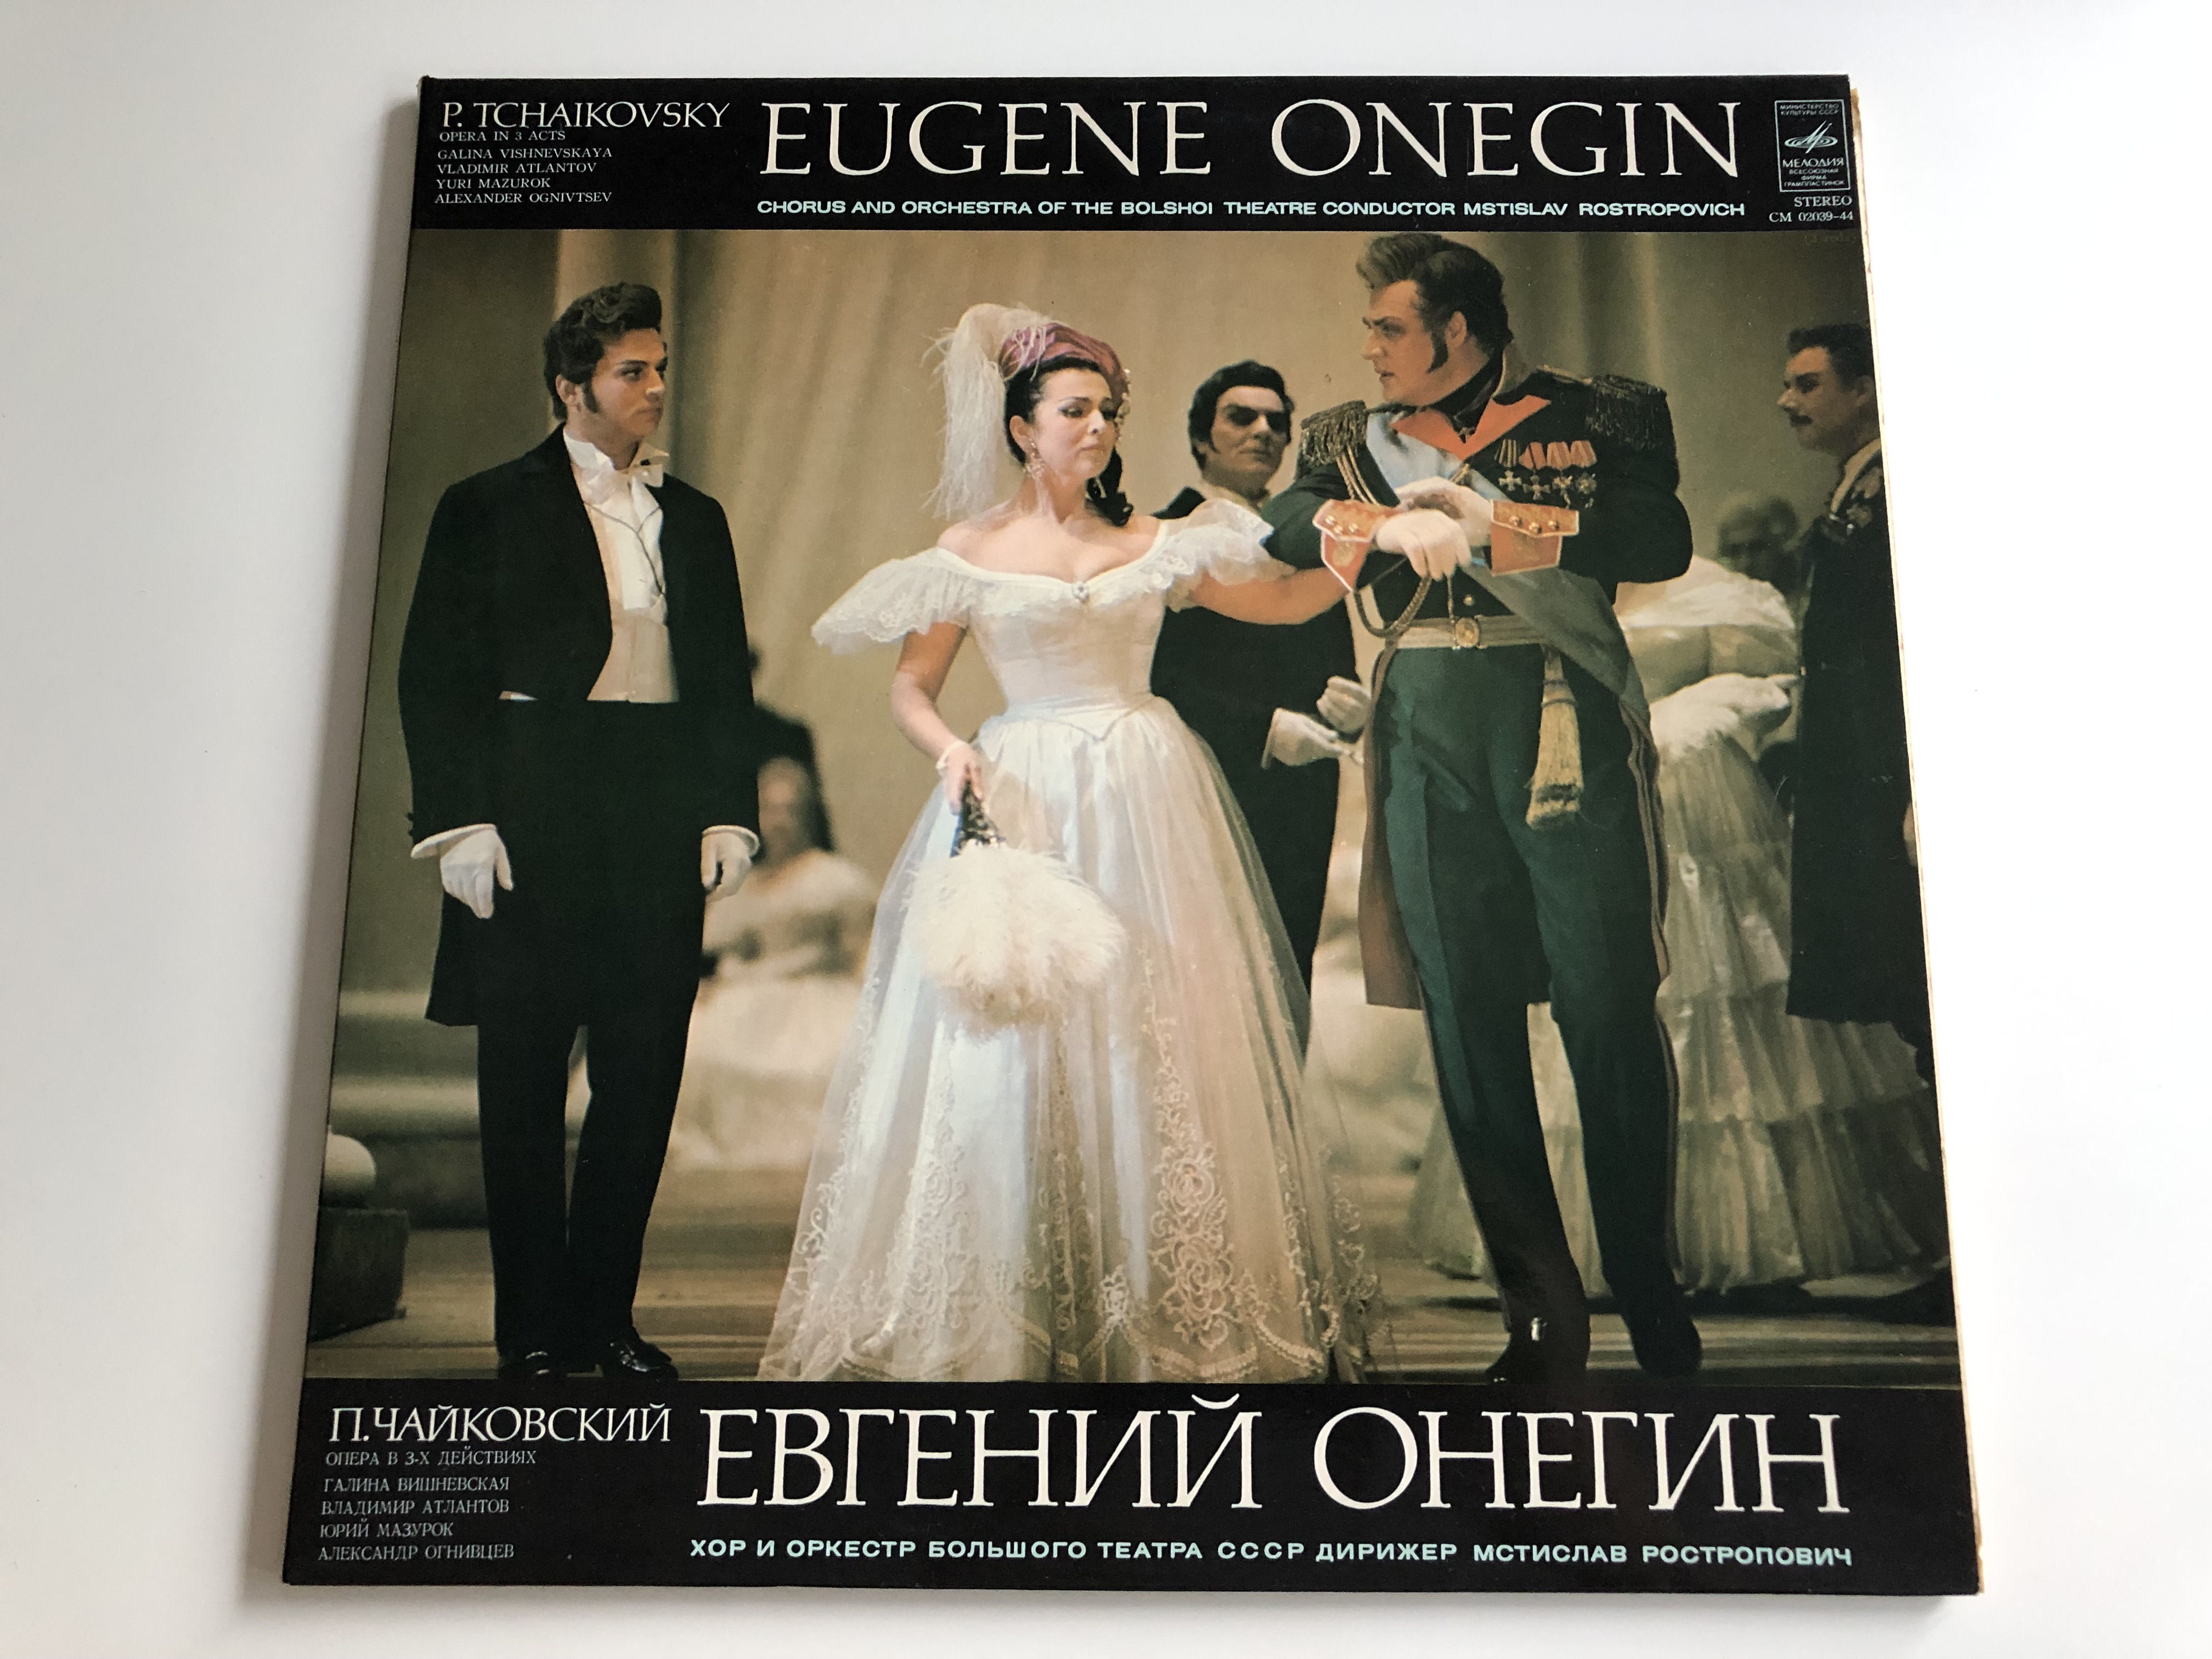 p.-tchaikovsky-eugene-onegin-conducted-mstislav-rostropovich-chorus-and-orchestra-of-the-bolshoi-theatre-lp-stereo-cm-02039-40-1-.jpg